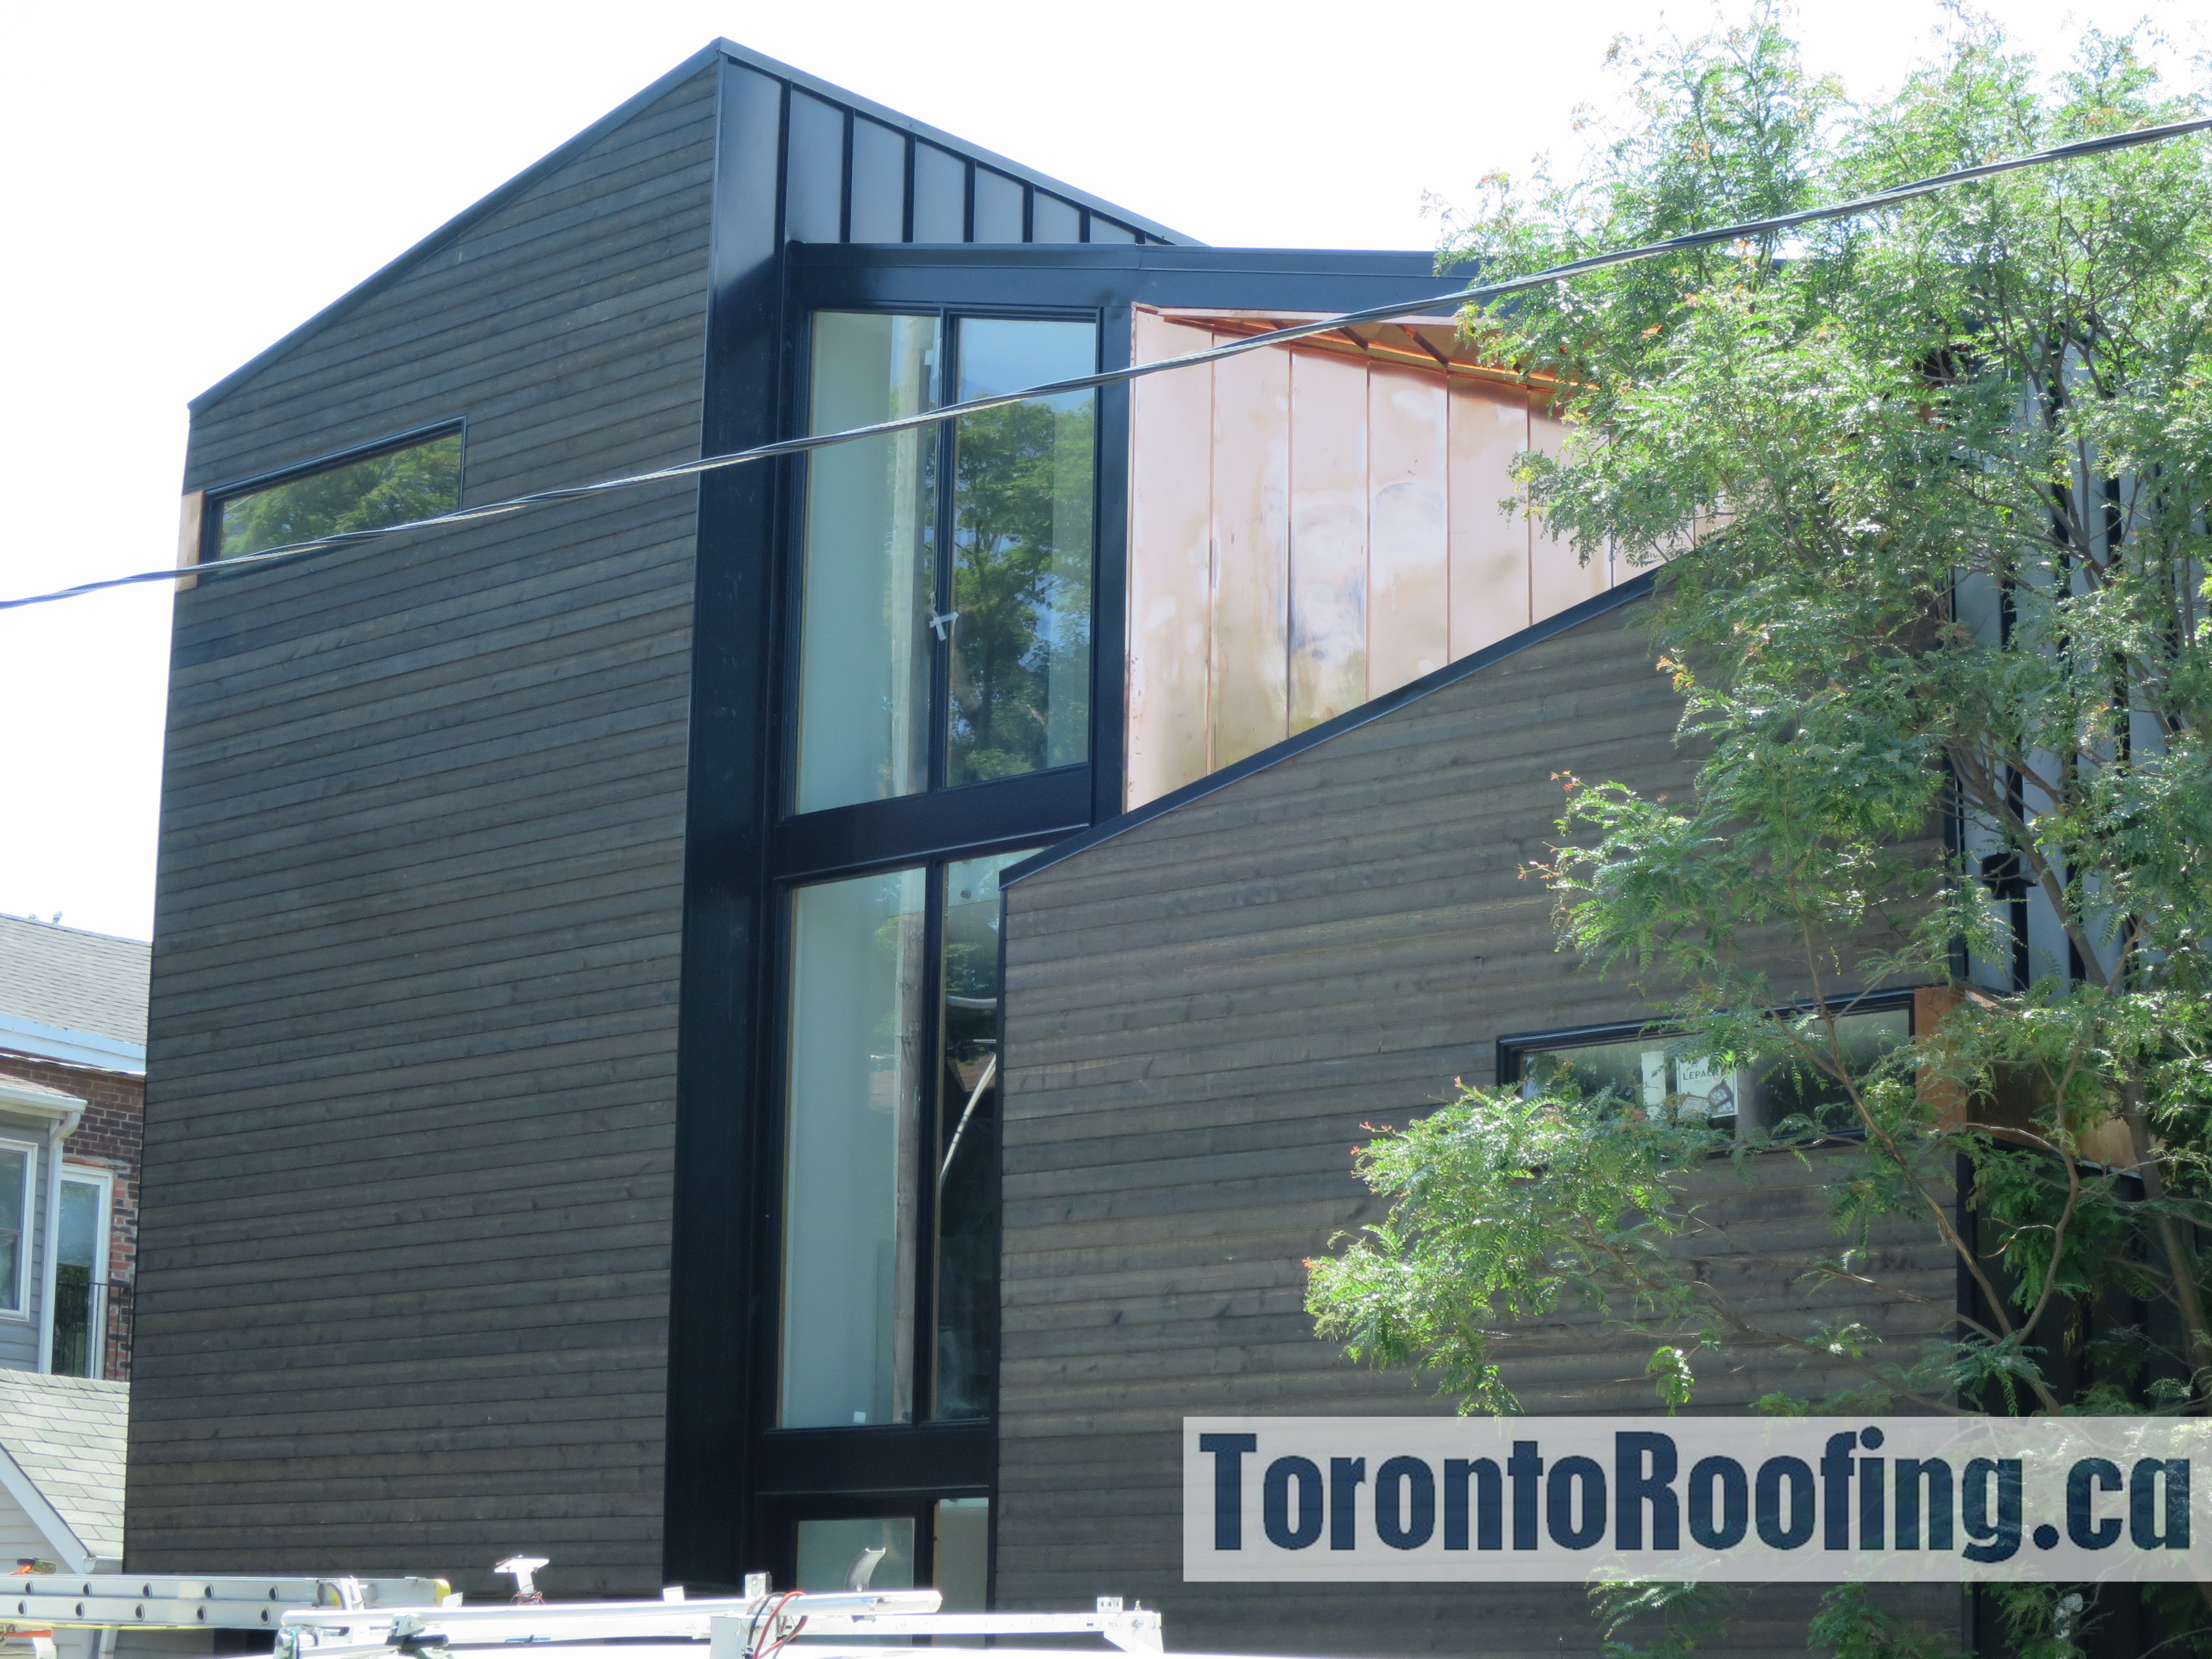 toronto-roofing-roof-siding-metal-copper-wood-modern-homes-aluminum-cladding-architeture-building-contractor-exterior-19